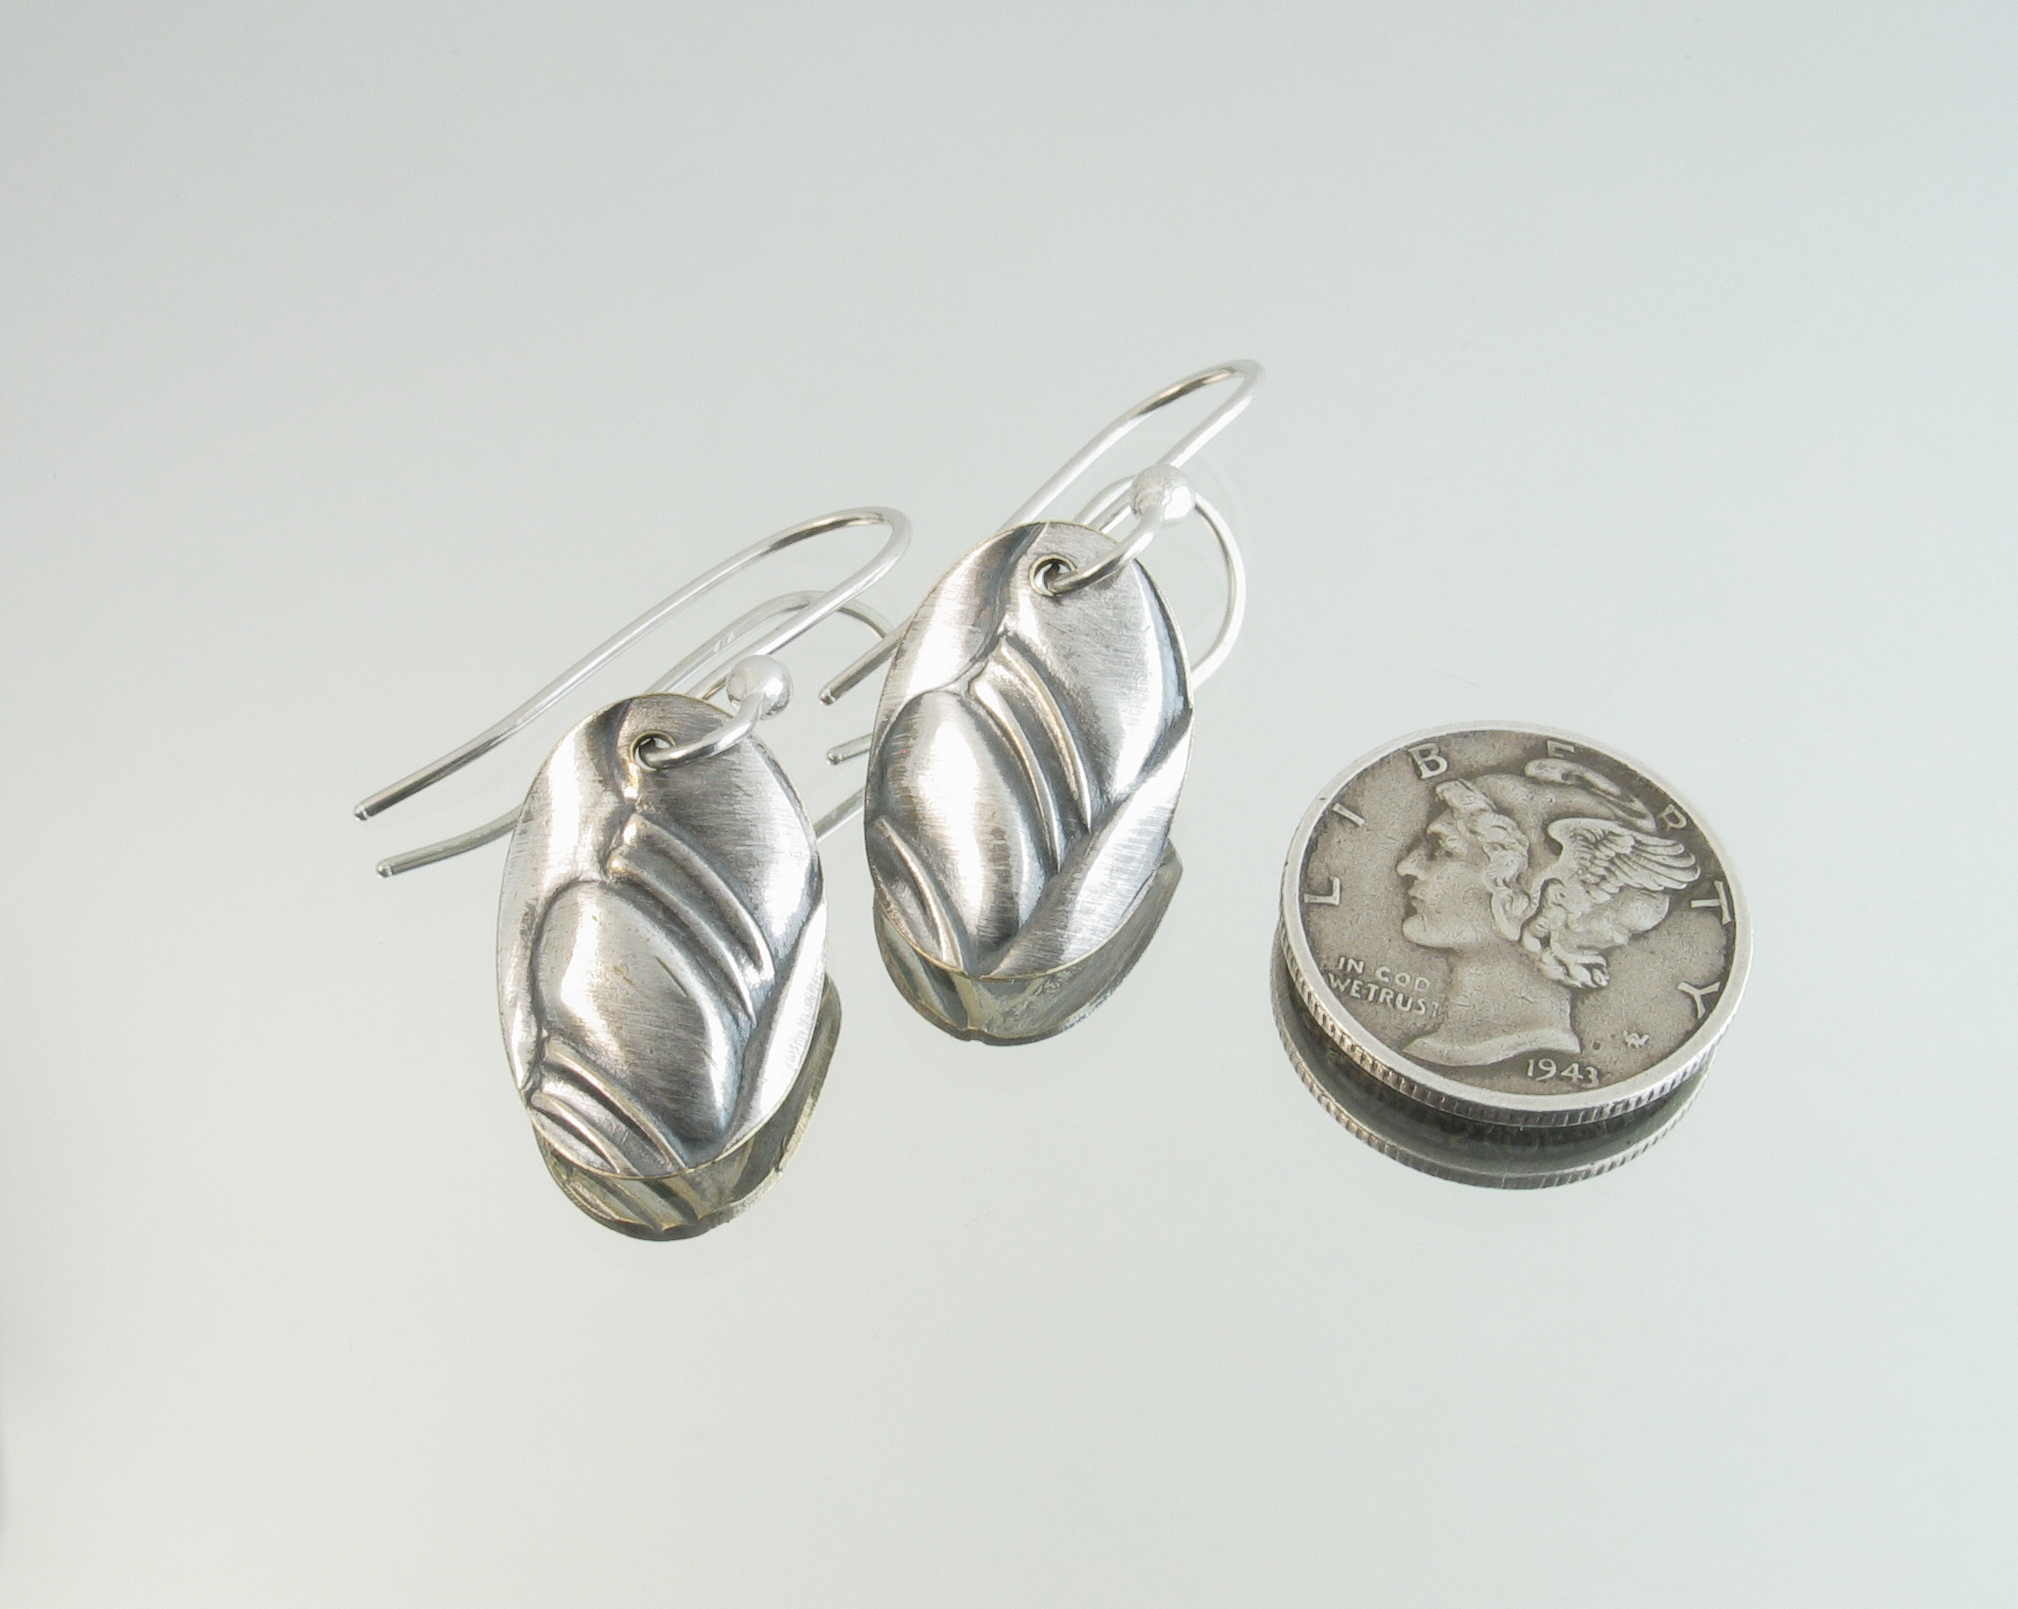 Brushed silver small earrings